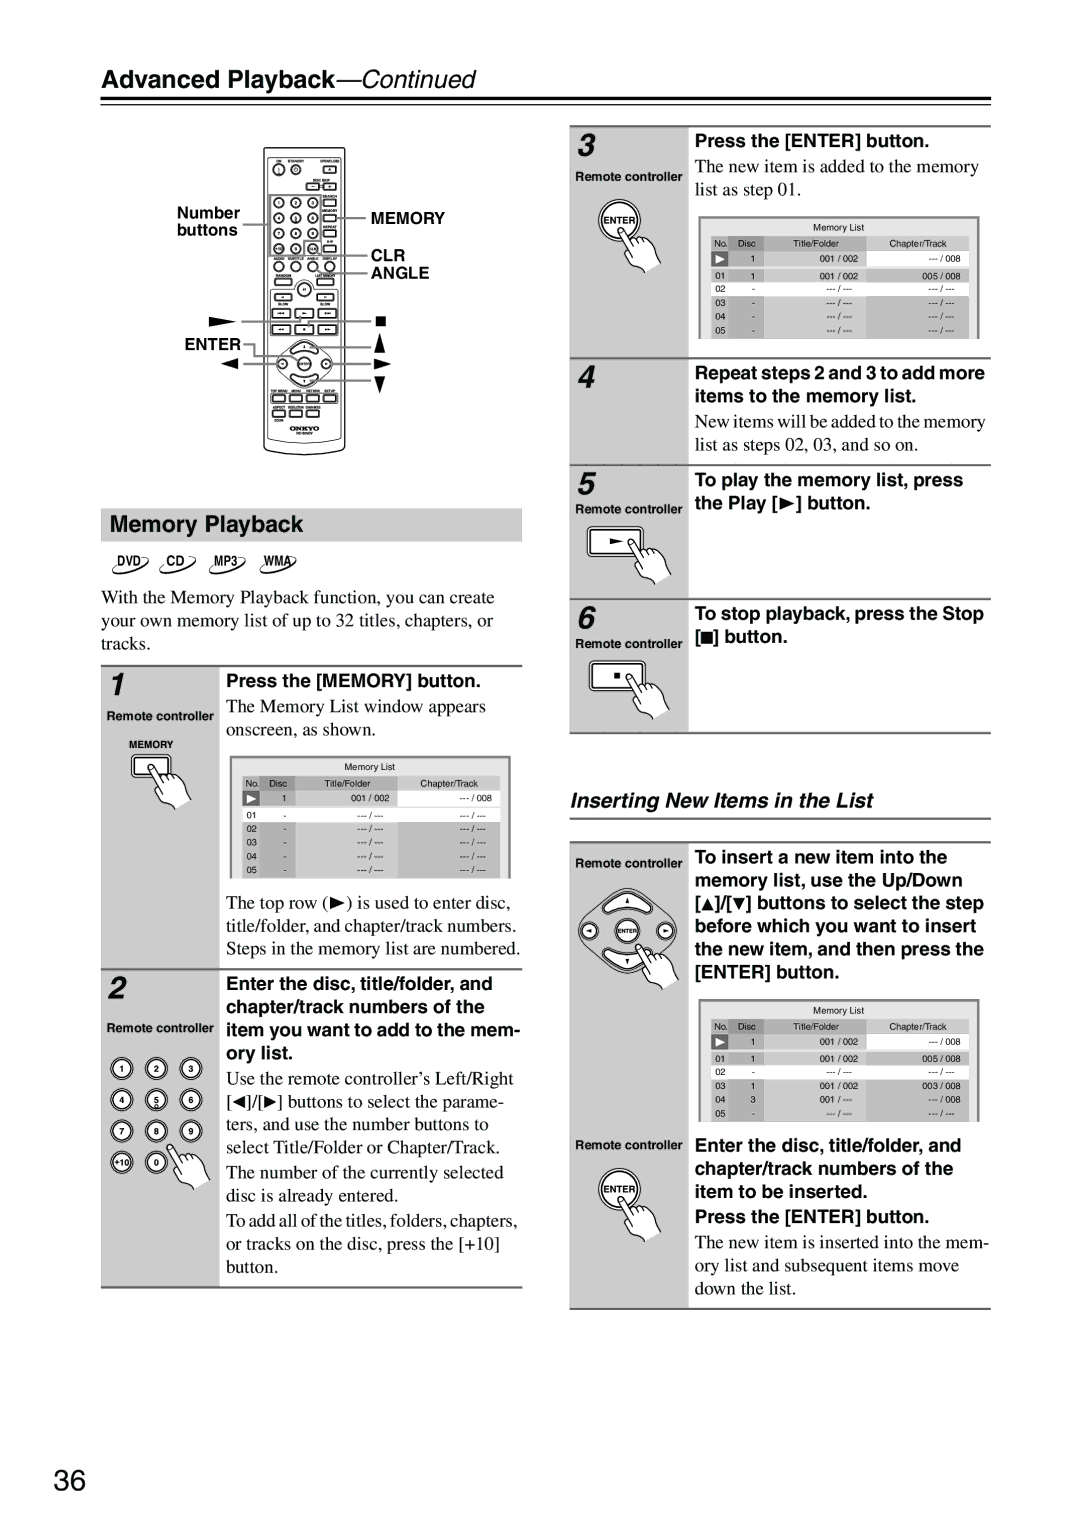 Onkyo DV-CP704S instruction manual Memory Playback, Inserting New Items in the List 